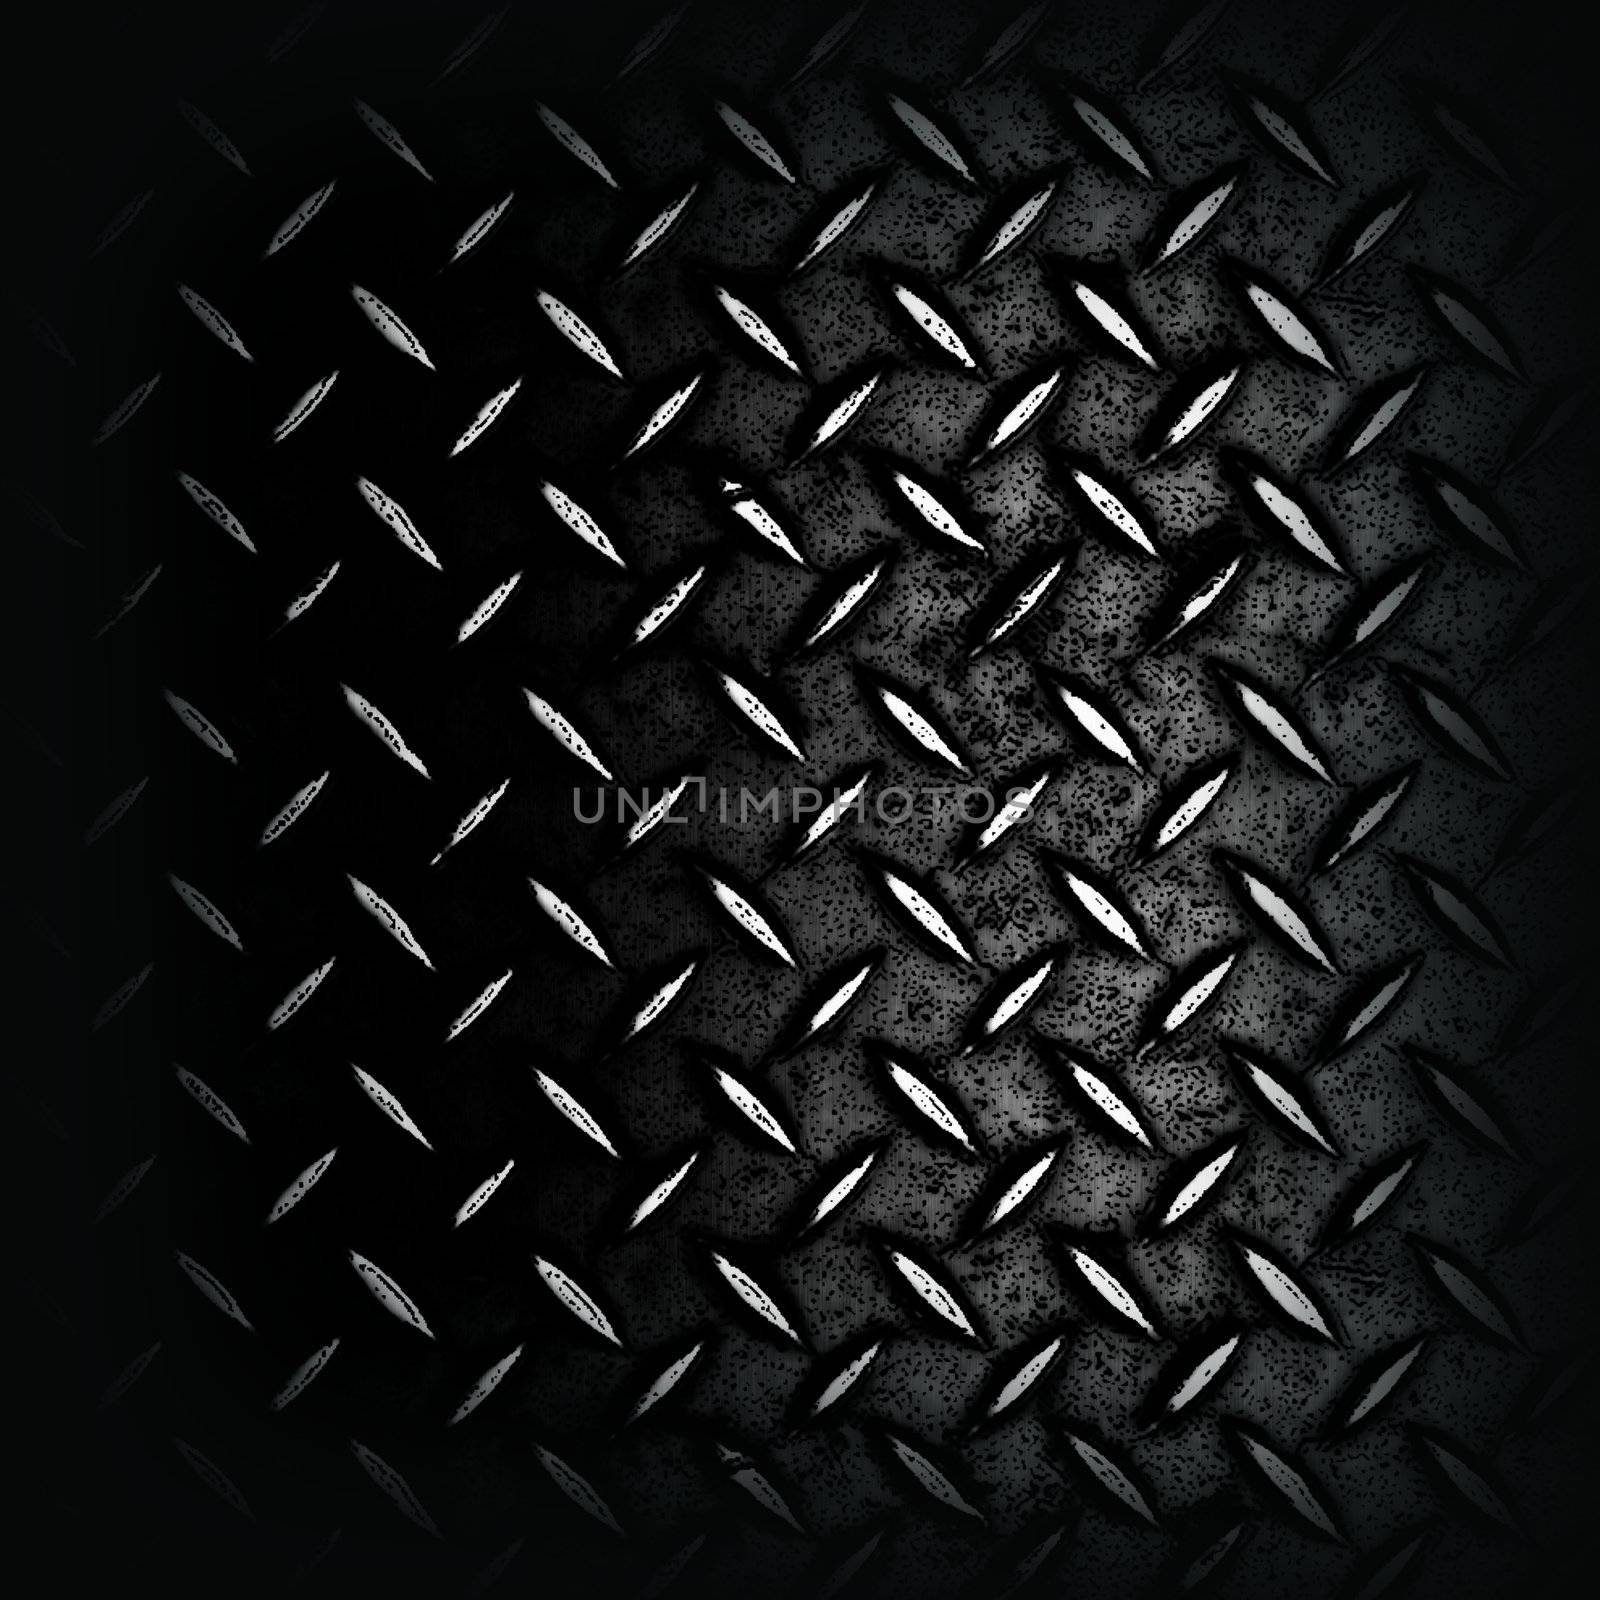 Grunge black diamond plated metal. great for backgrounds and overlays